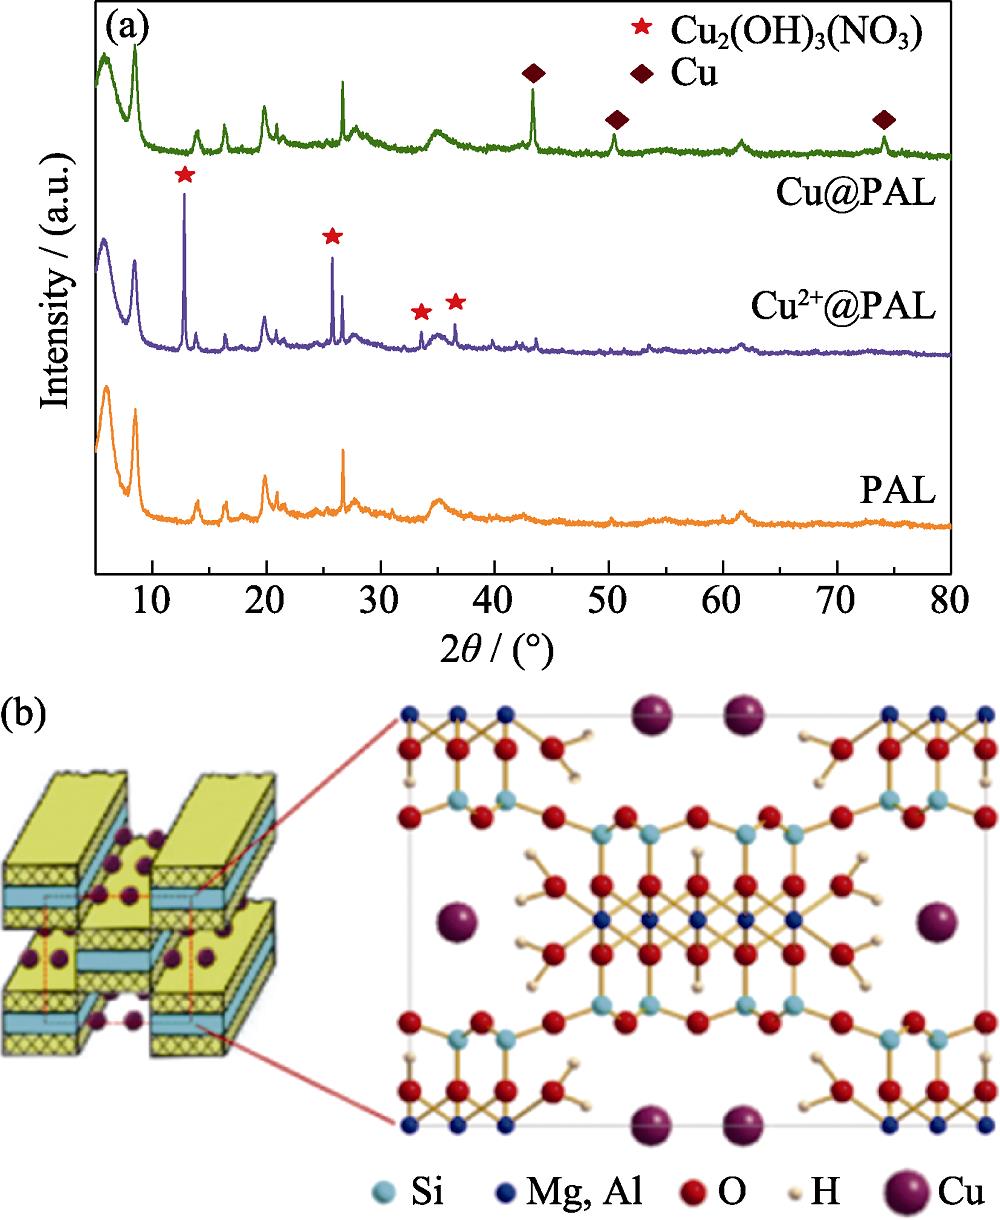 (a) XRD patterns of the samples and (b) structural schematic diagram of Cu@PAL